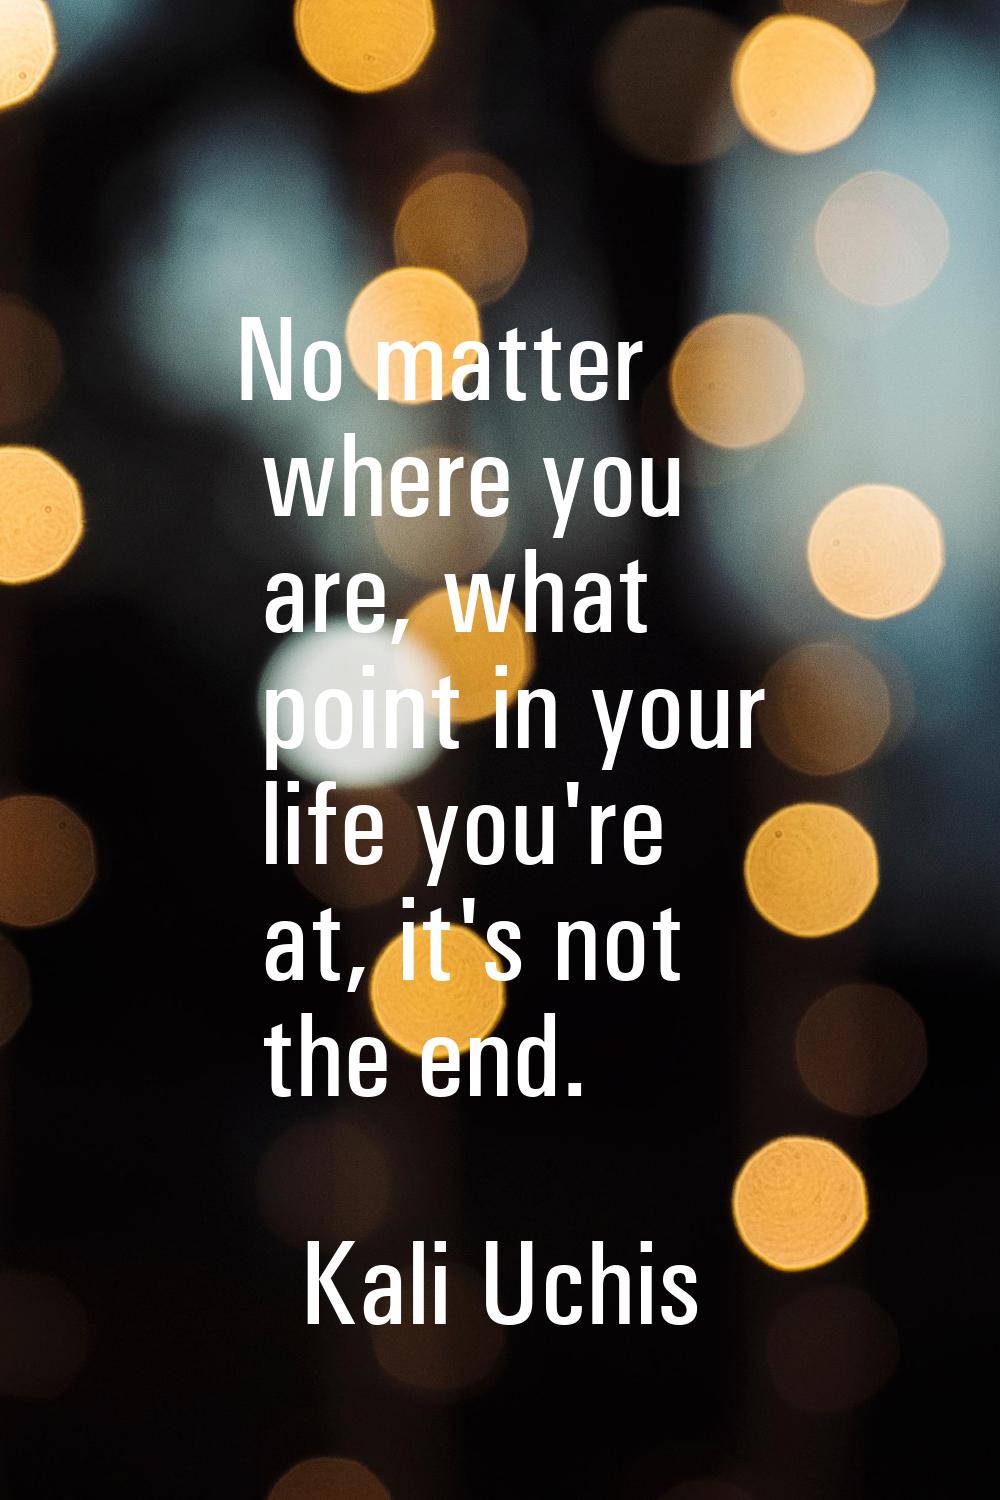 No matter where you are, what point in your life you're at, it's not the end.